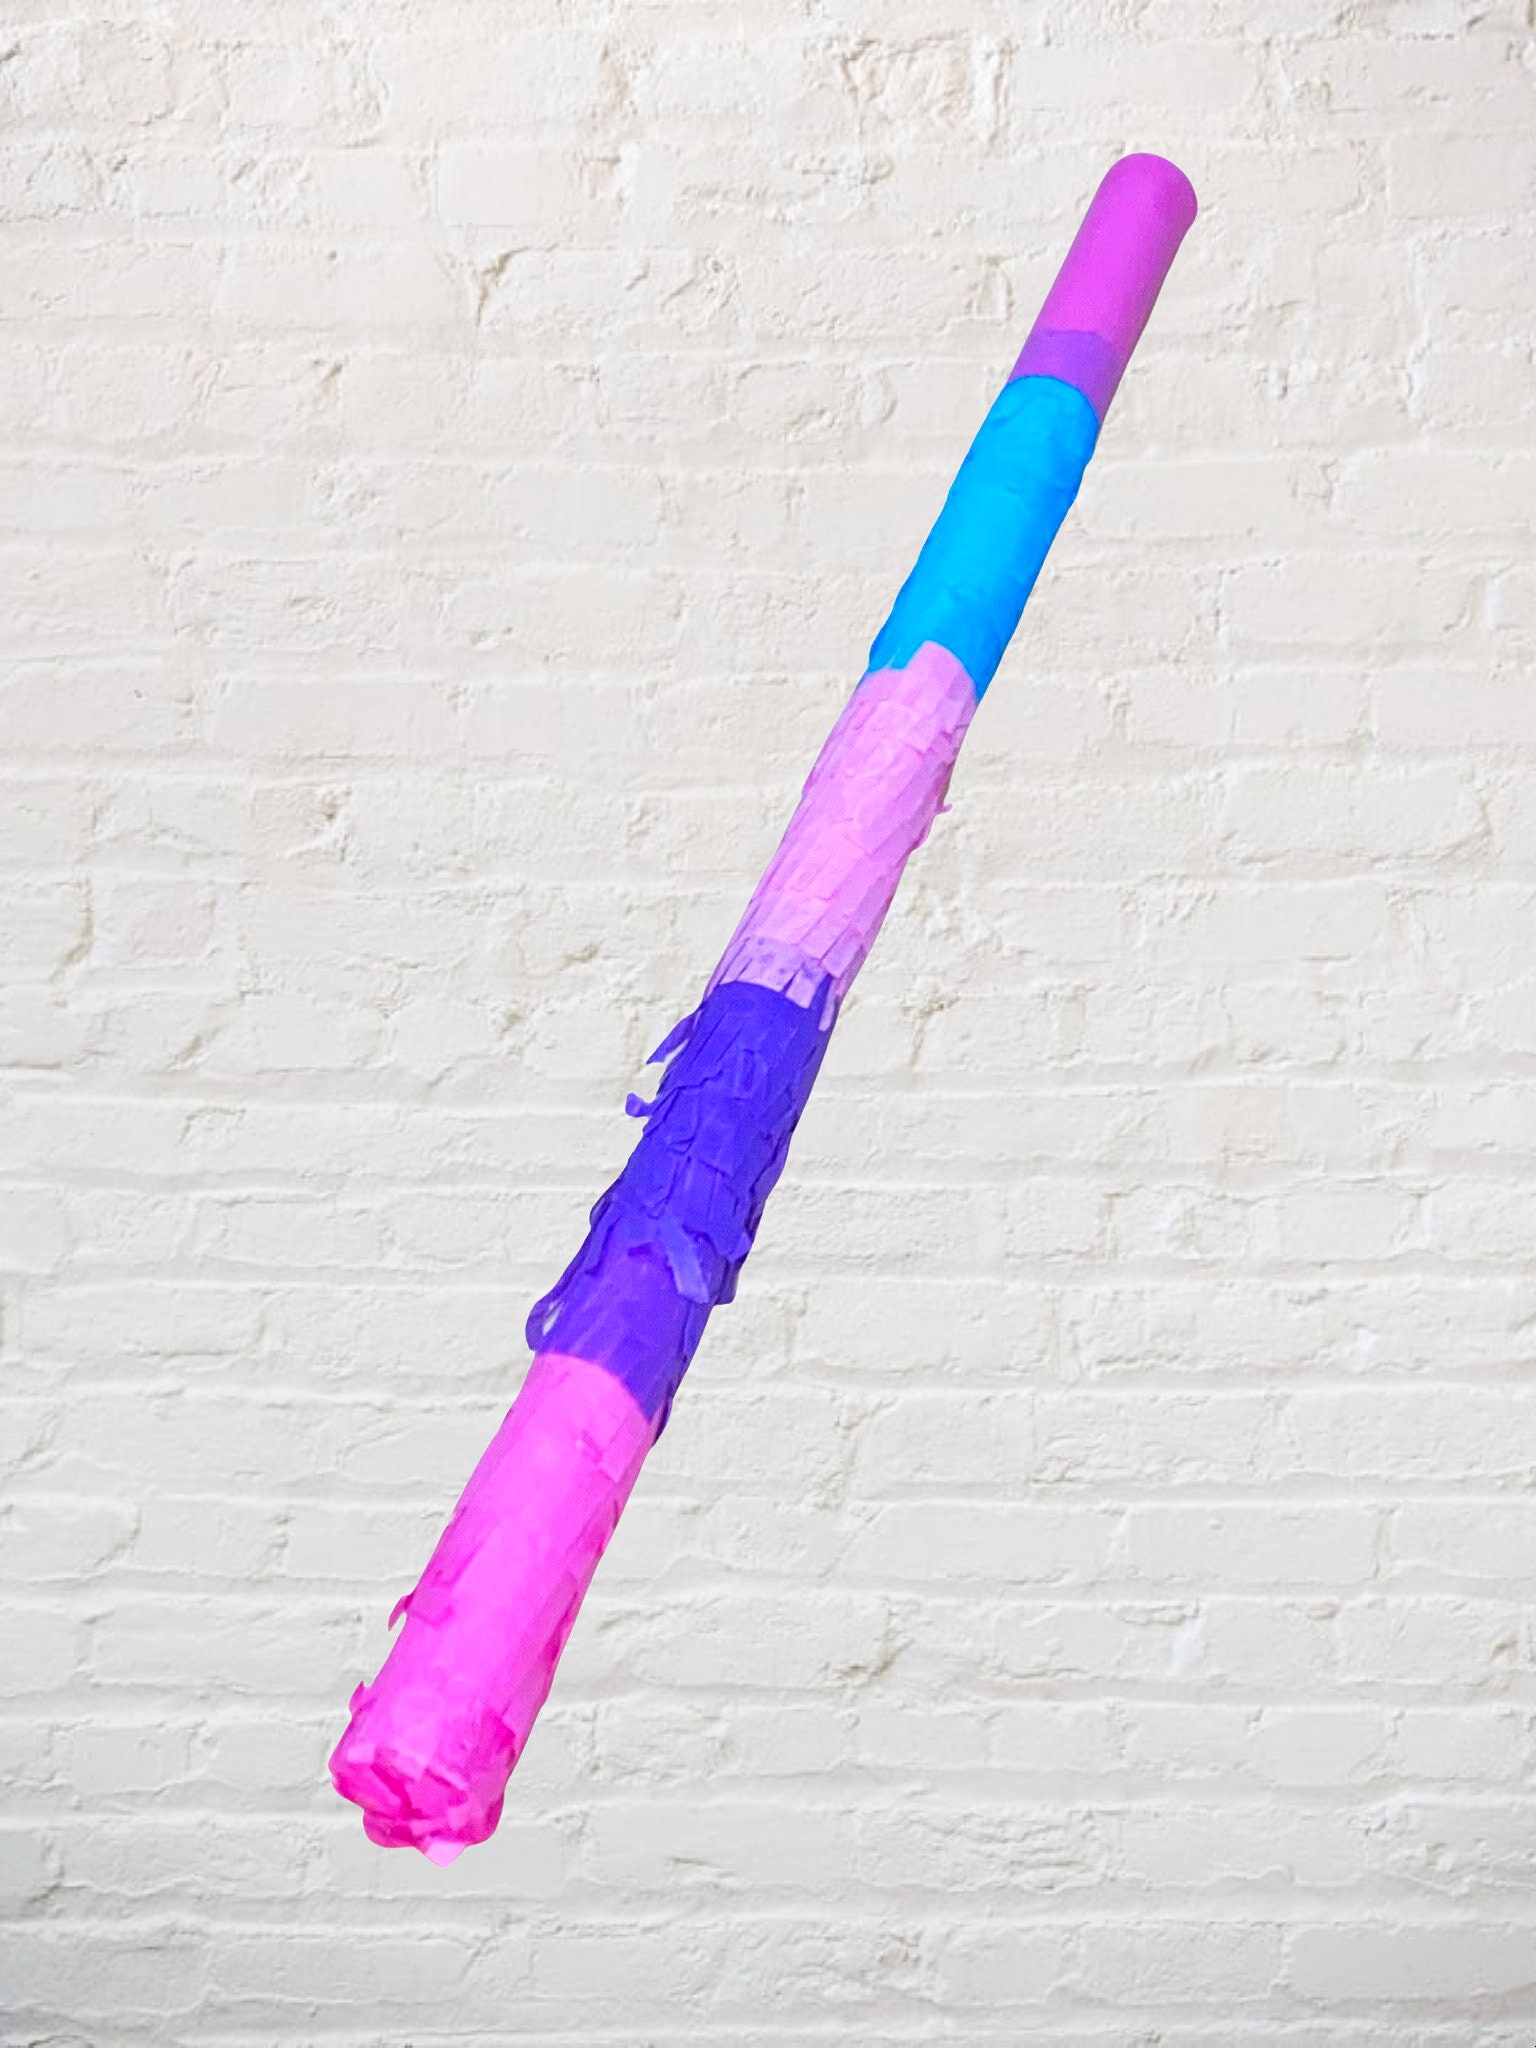 Buy Pinata Stick for Thematic Party, Party Supplies, Birthday Party